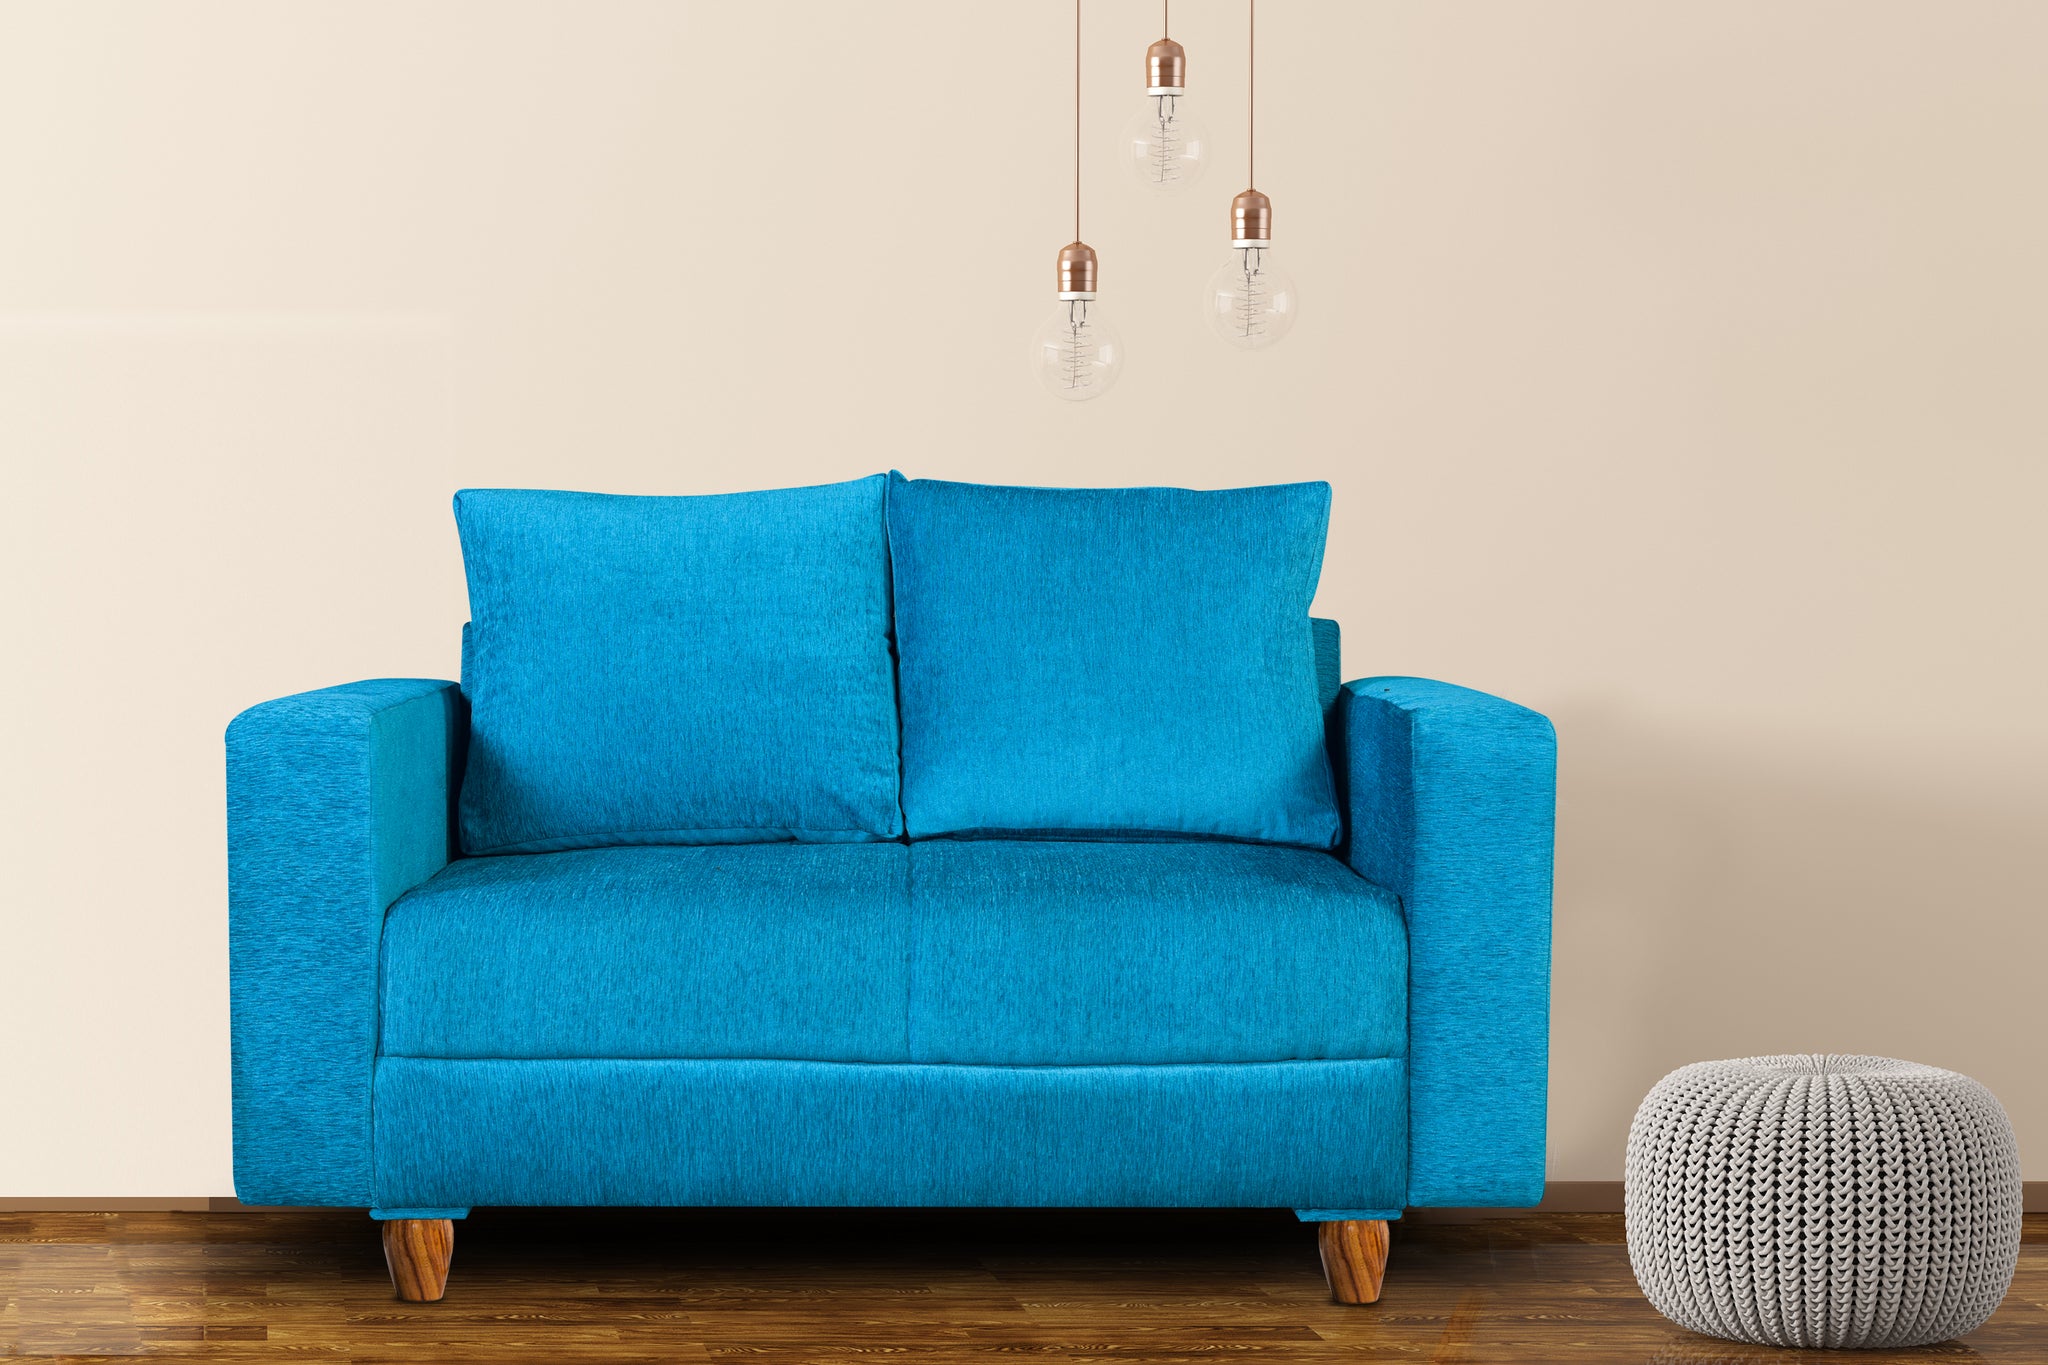 Seventh Heaven Rio 2 Seater Wooden Sofa Set Modern & Elegant Smart Furniture Range for luxurious homes, living rooms and offices. Microfiber back cushions for extra comfort and spacious sitting. Blue Colour Molphino fabric with sheesham polished wooden legs. 